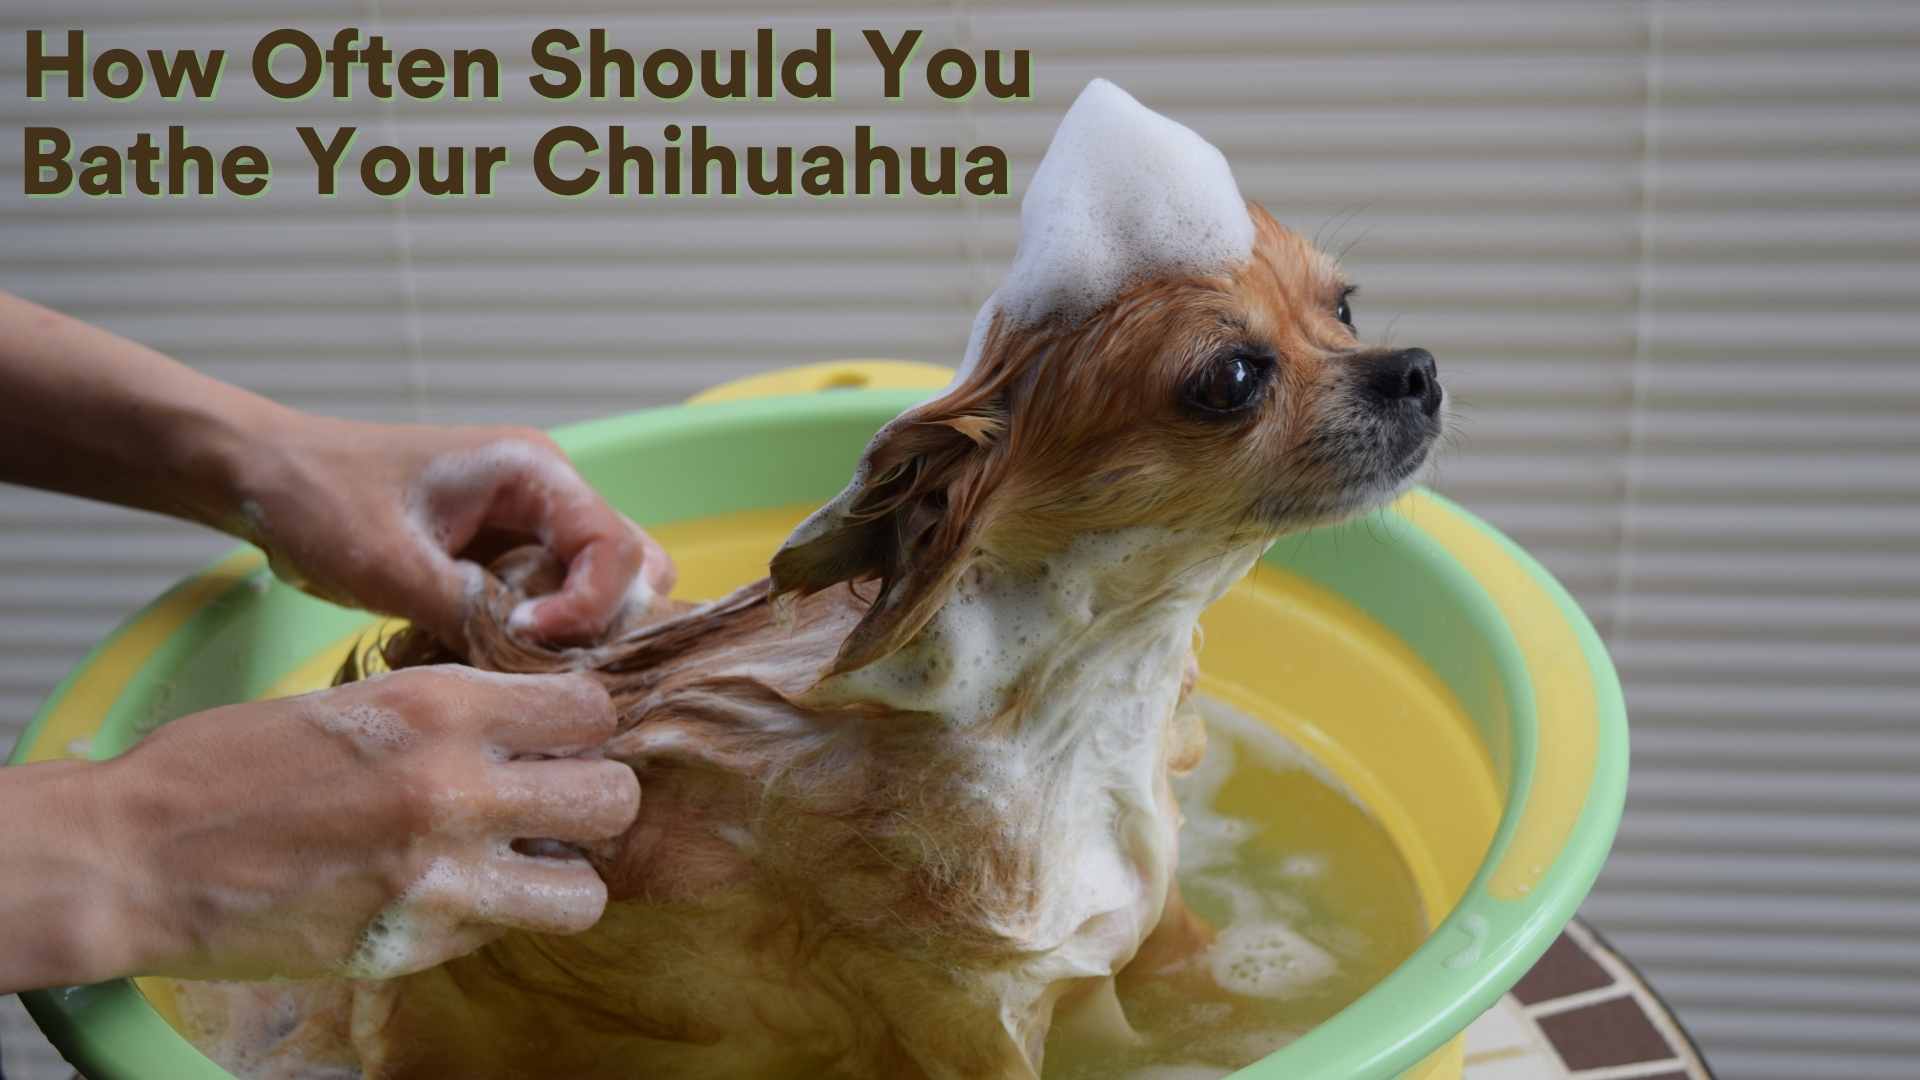 How Often Should you bath your chihuahua